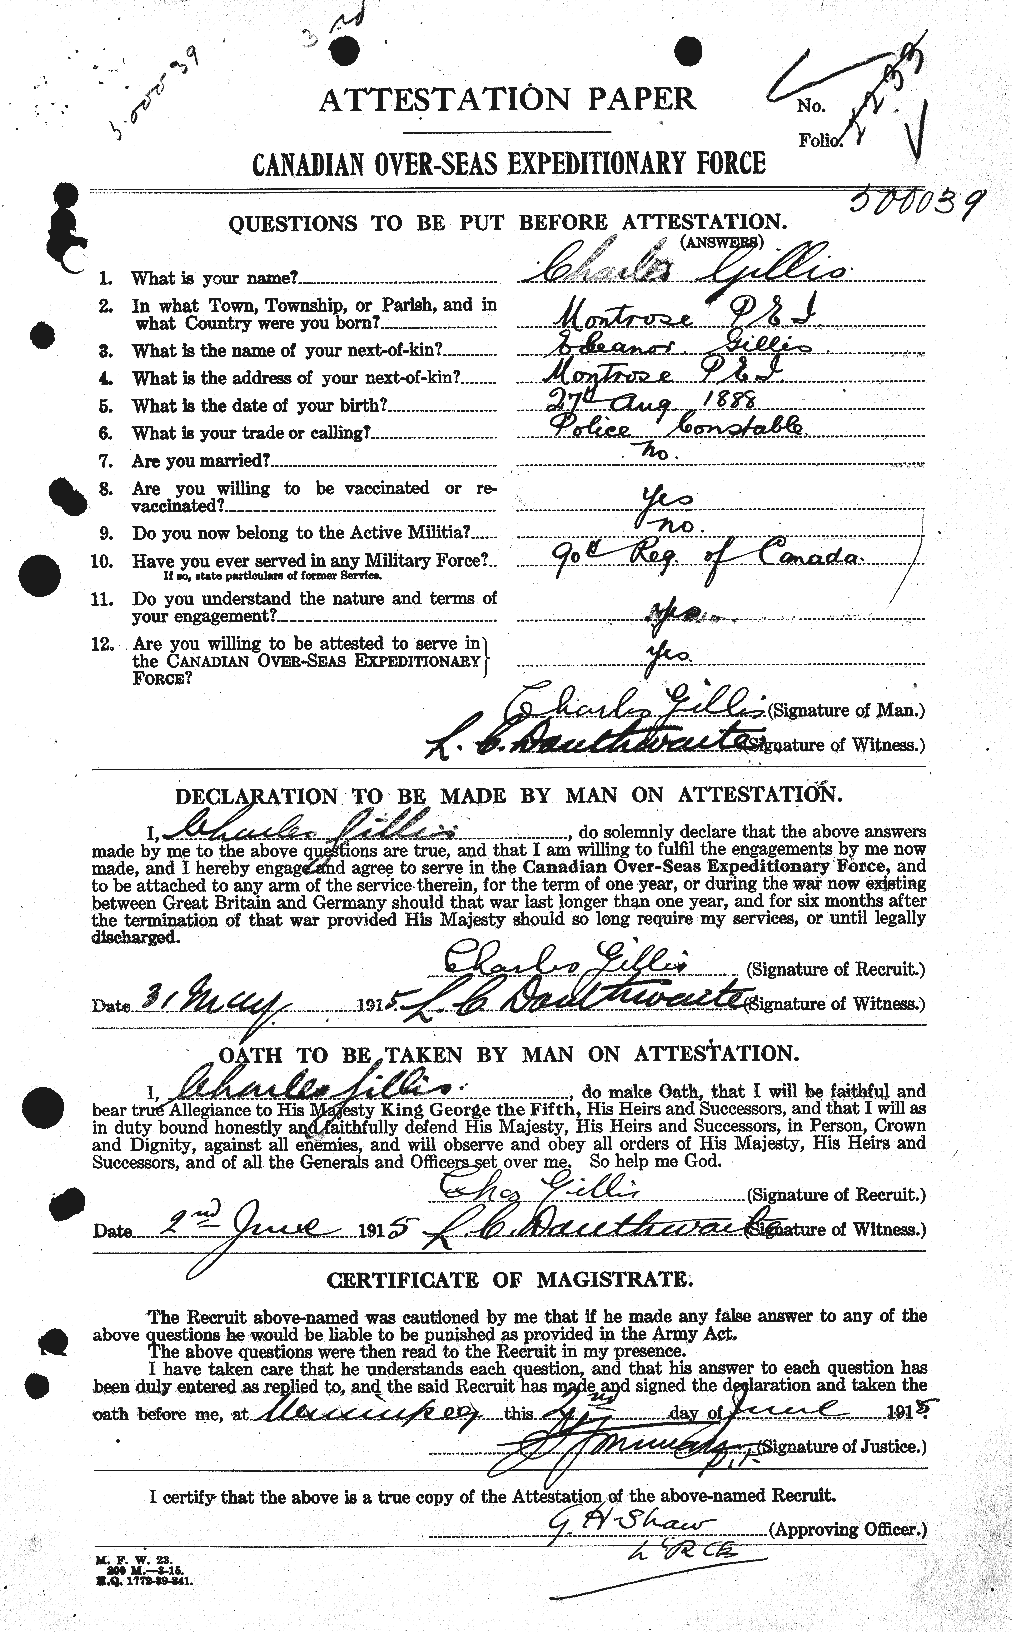 Personnel Records of the First World War - CEF 353103a